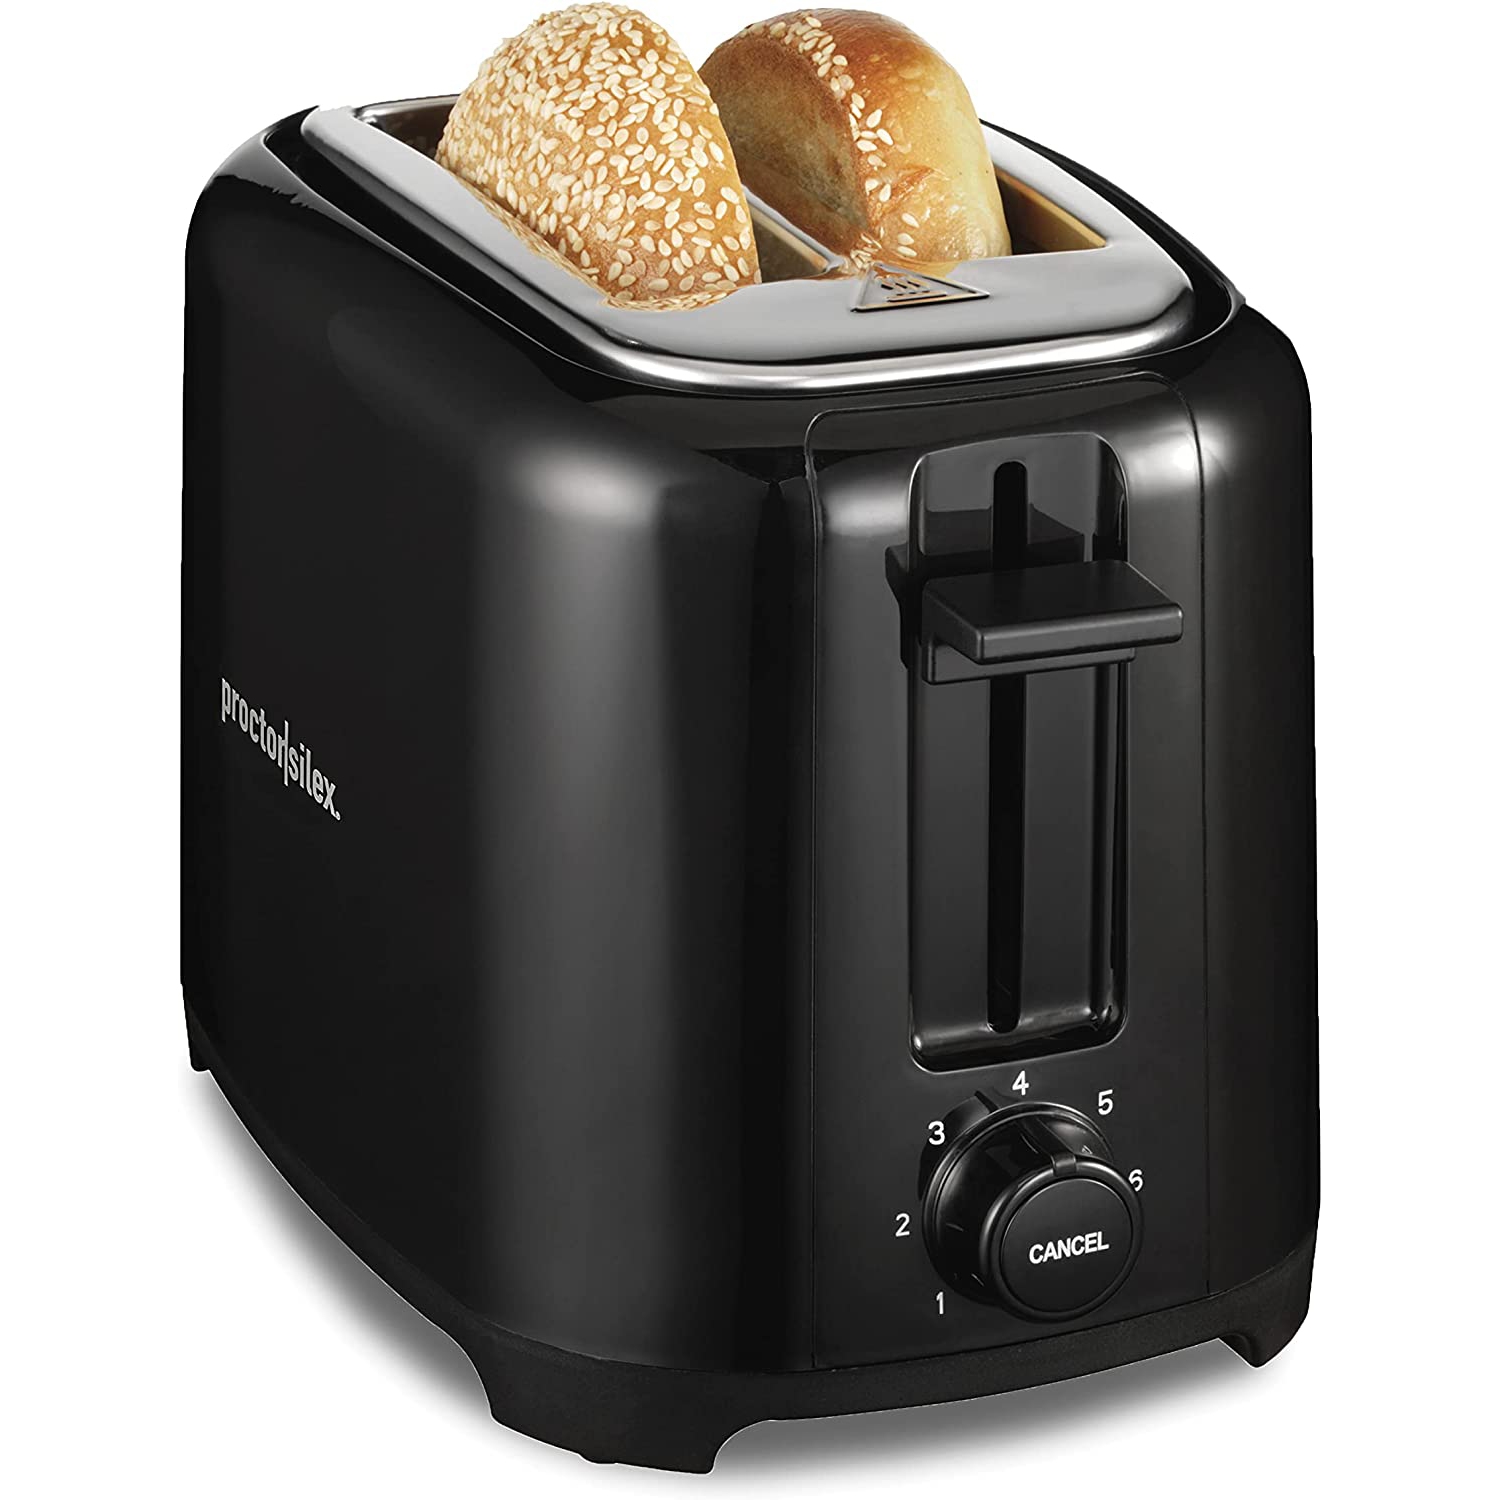 Proctor Silex 22215PS 2-Slice Extra-Wide Slot Toaster with Cool Wall, Shade Selector, Toast Boost, Auto Shut-Off and Cancel Button, Black,